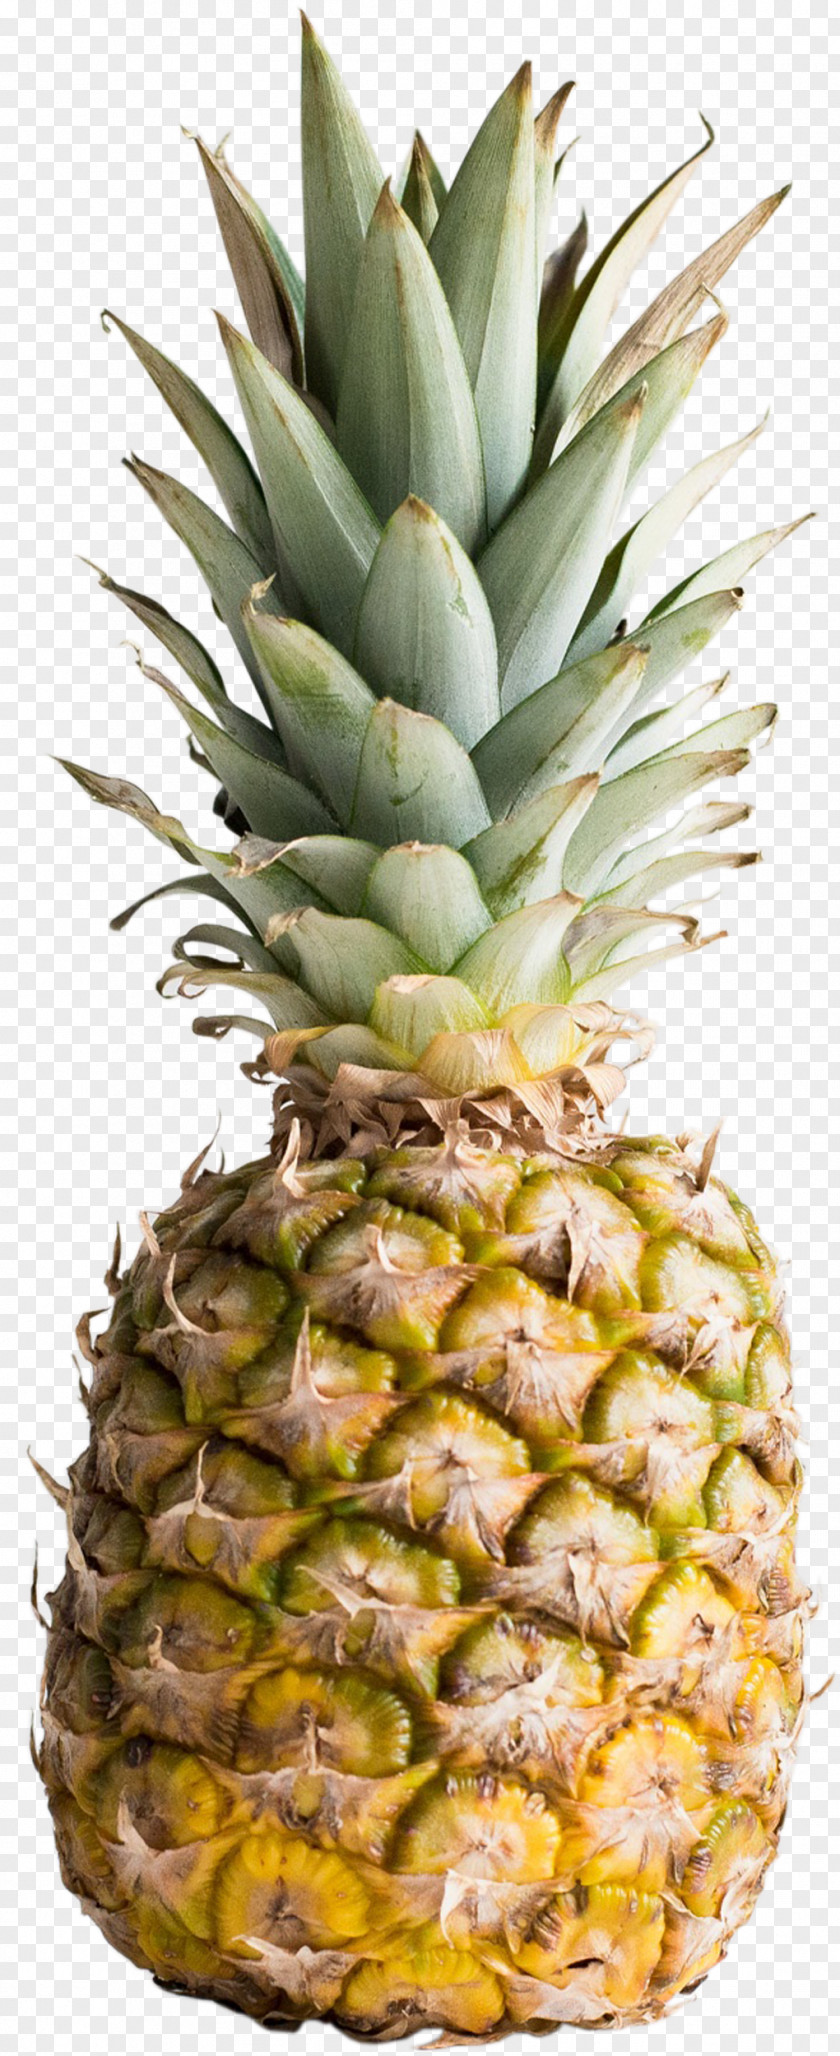 Ananas Exotic Fruit Pineapple Smoothie Food Whole Grain PNG